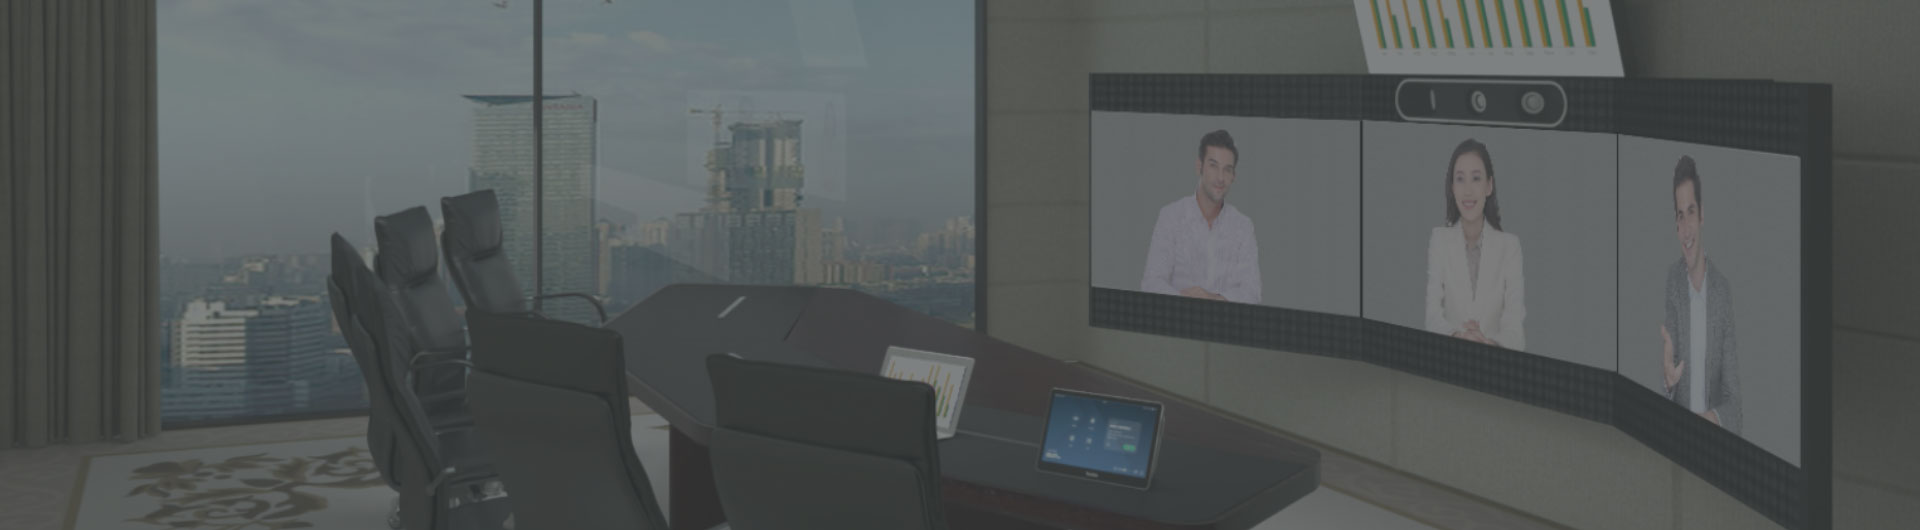 <div style="text-align: center;"><strong><span style="color:#ffffff;"><span style="font-size:48px;">Financial Video Conferencing&nbsp;Scenarios</span></span></strong></div>
